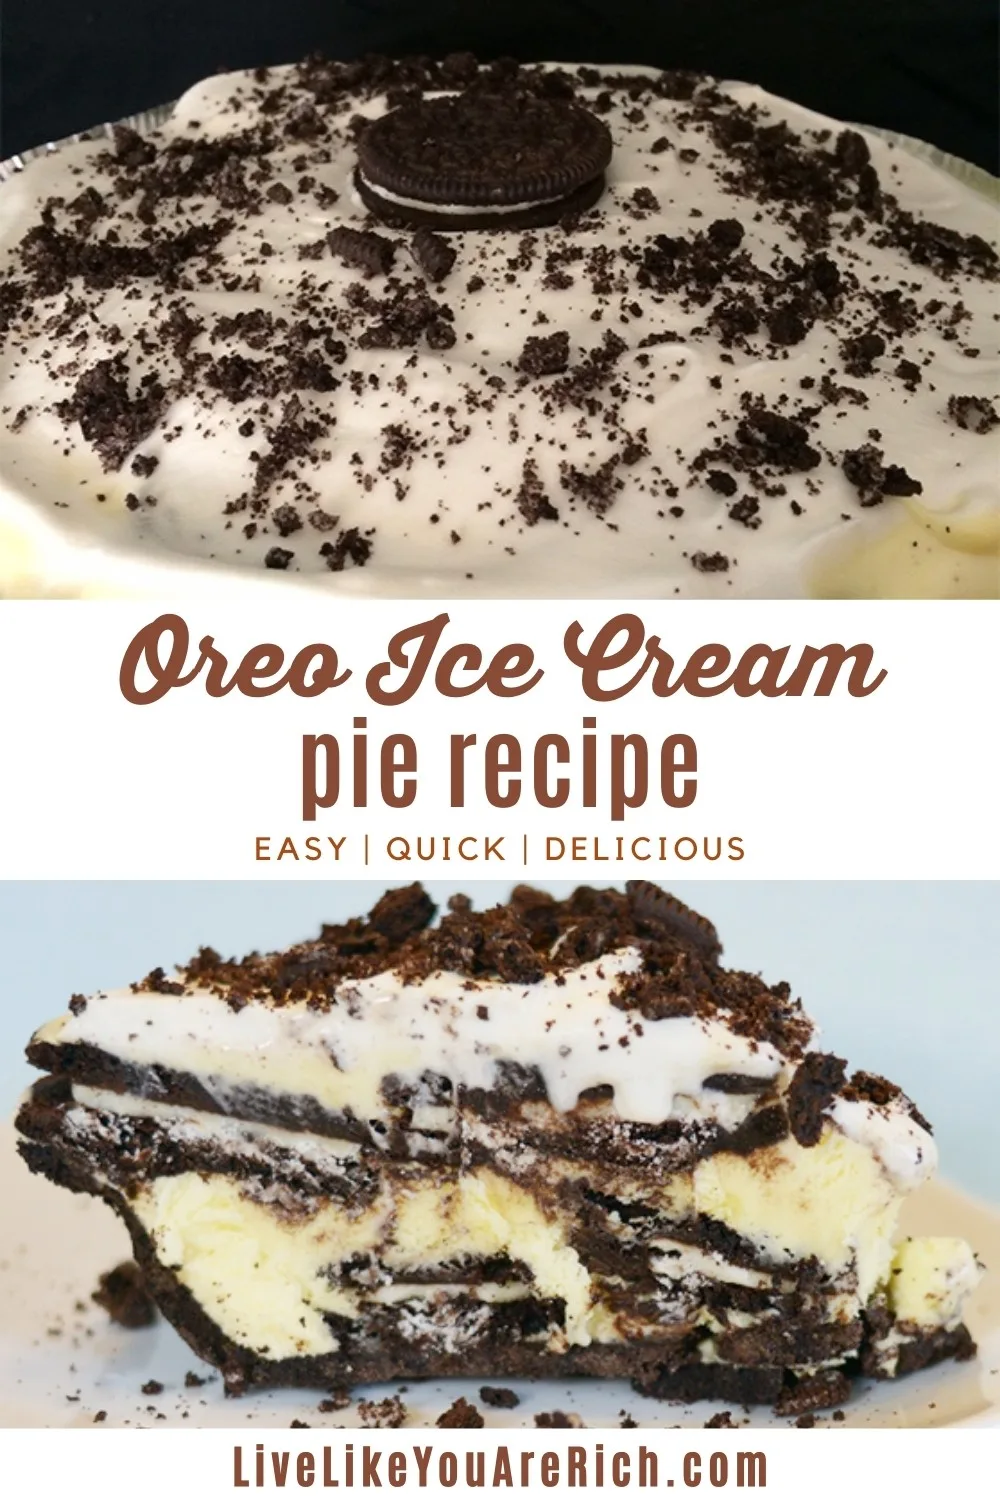 This super easy Oreo Ice Cream Pie recipe is so easy to make, quick, and absolutely delicious. It can be served very cold or frozen. I personally like it frozen because it is like an ice cream cake but instead it is an ice cream pie. #oreoicecream #pie